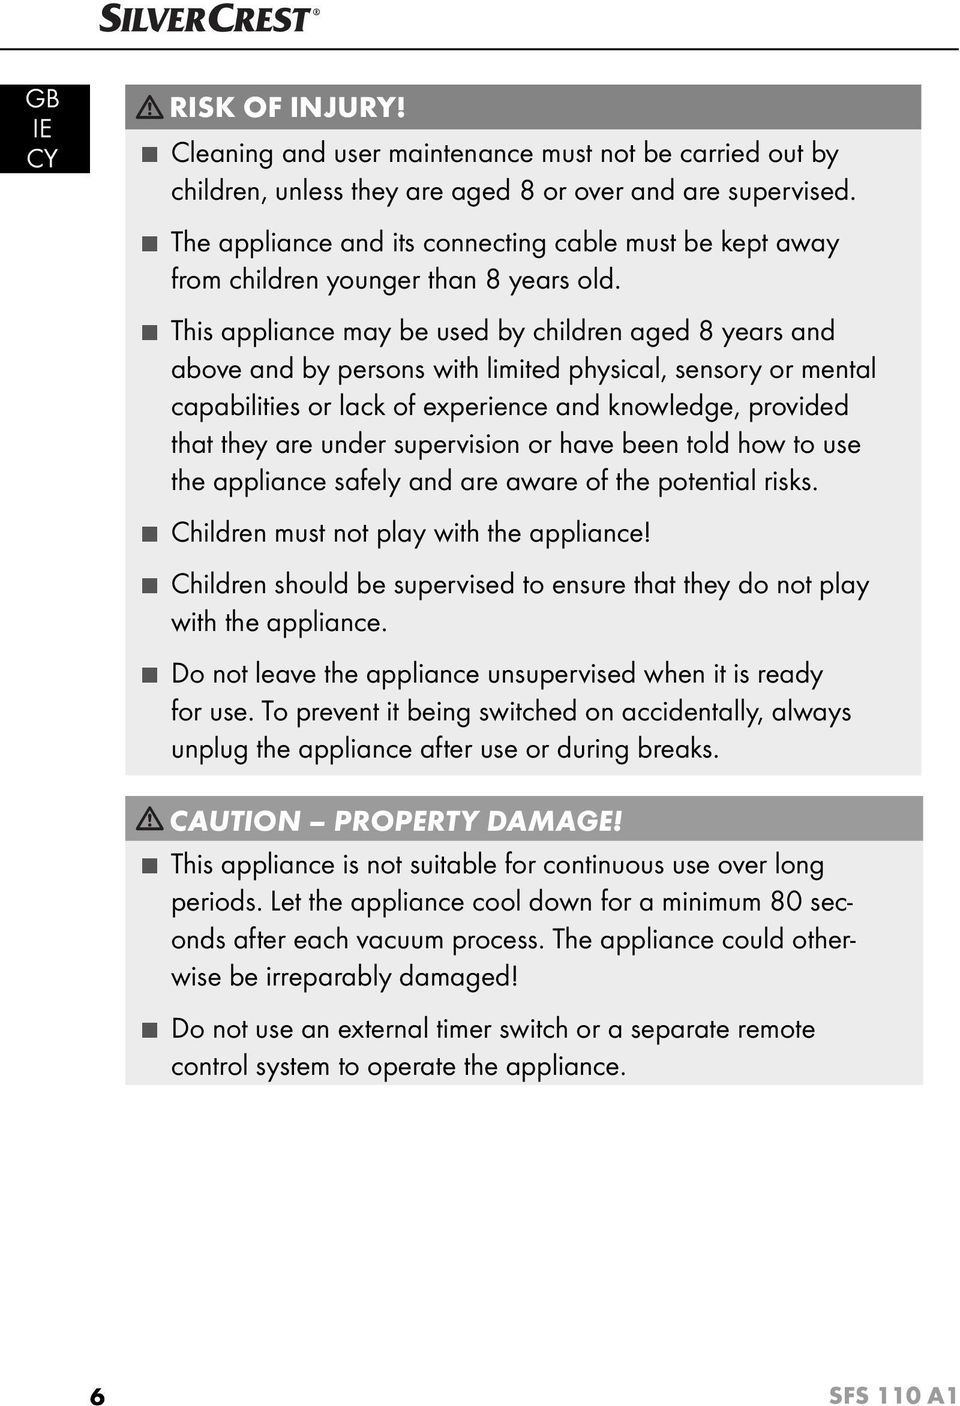 This appliance may be used by children aged 8 years and above and by persons with limited physical, sensory or mental capabilities or lack of experience and knowledge, provided that they are under